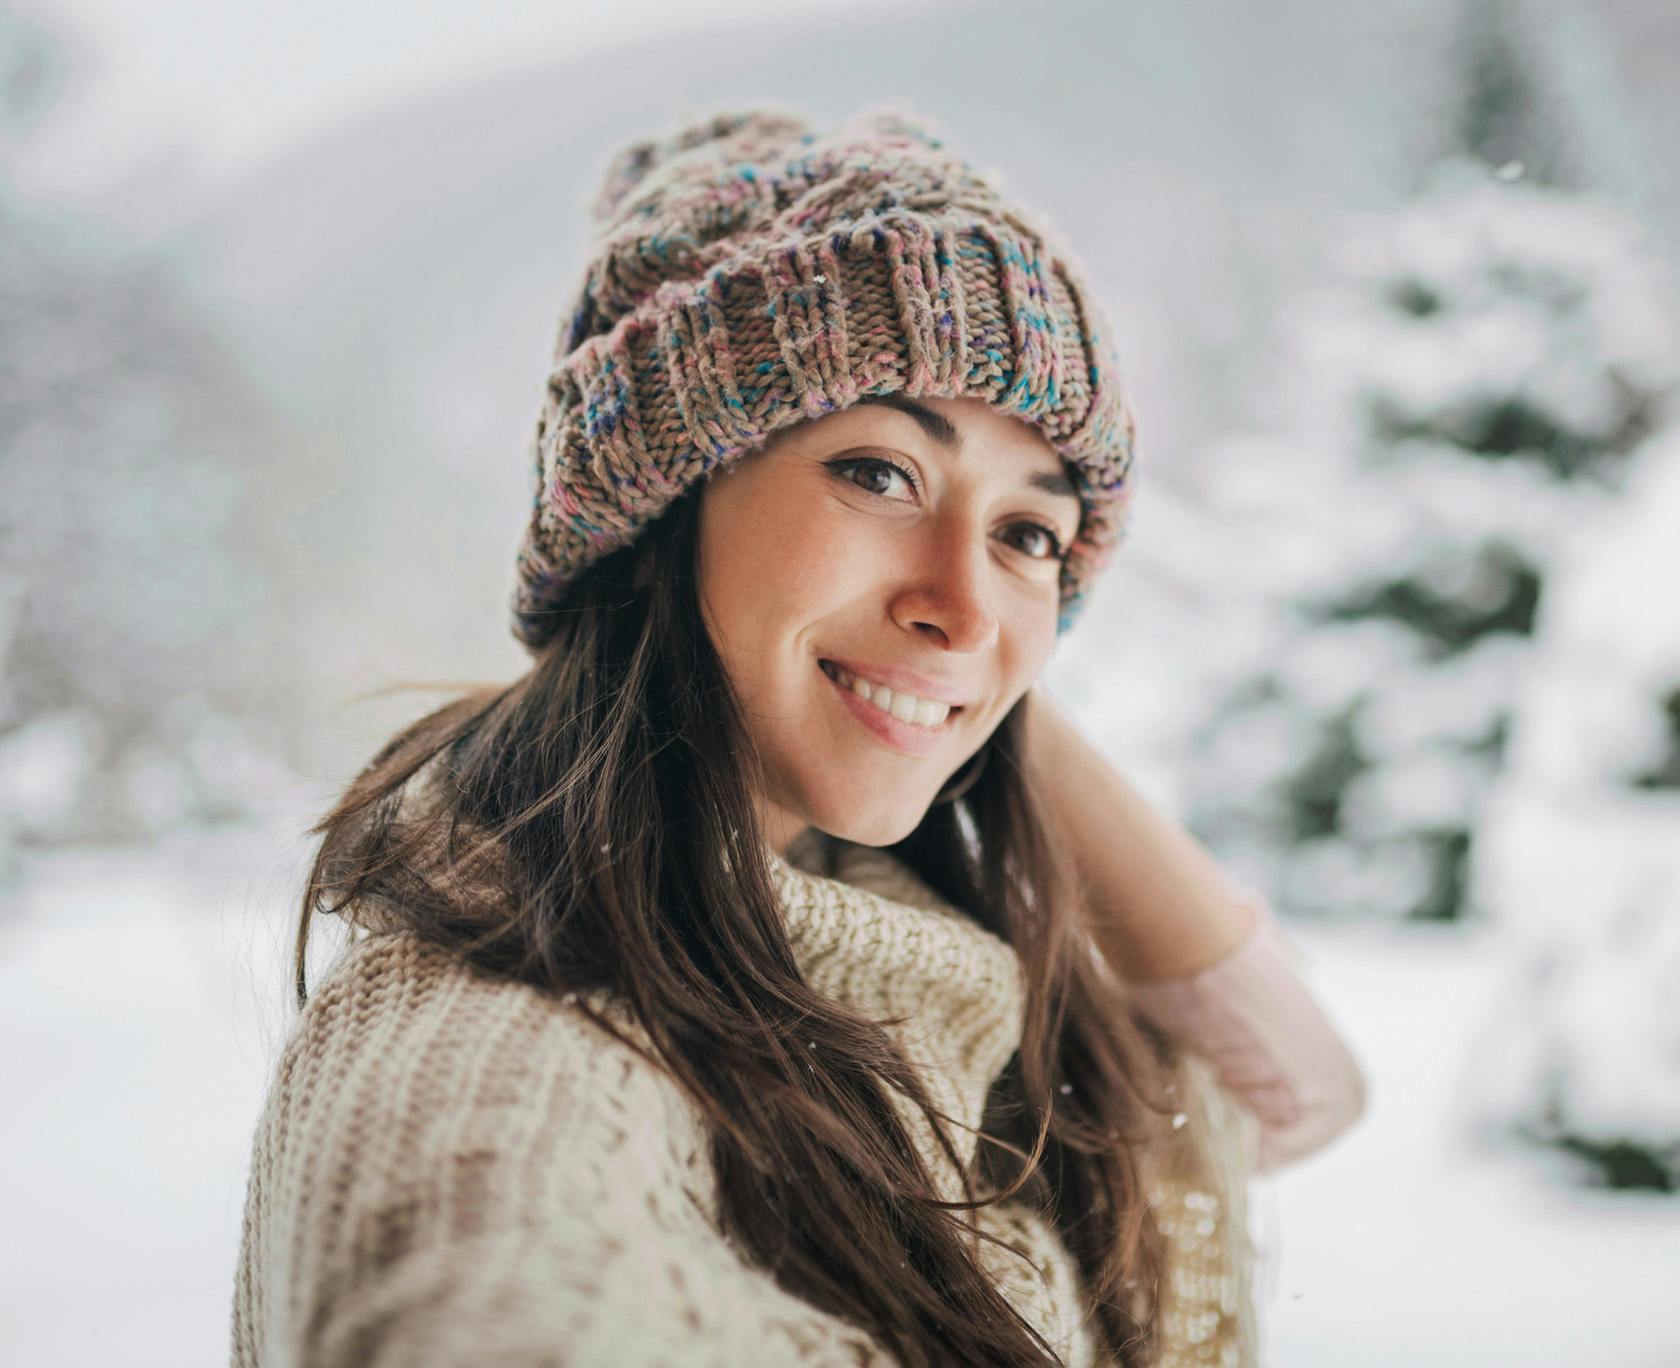 woman in a knitted hat and scarf smiling in the snow